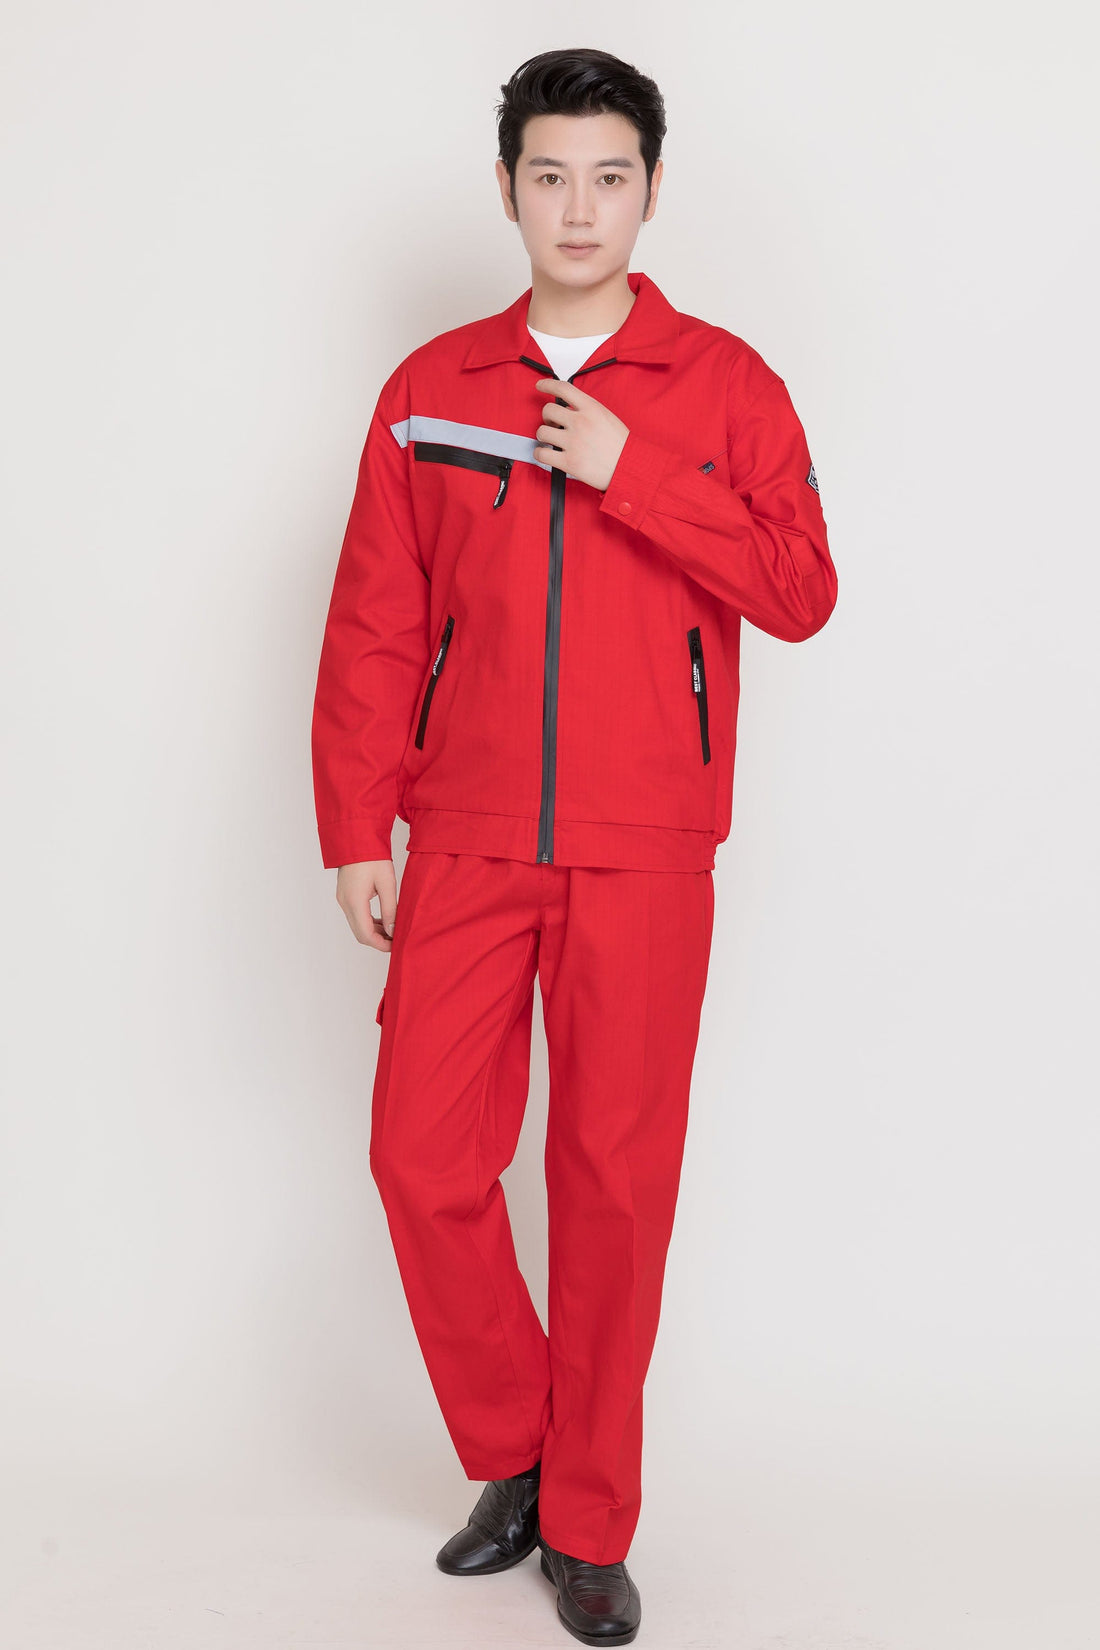 Corals Trading Co. 可樂思百貨商行 涤棉抗静电 Spring and Autumn style long-sleeved anti-static work clothes series SD-AS-W503